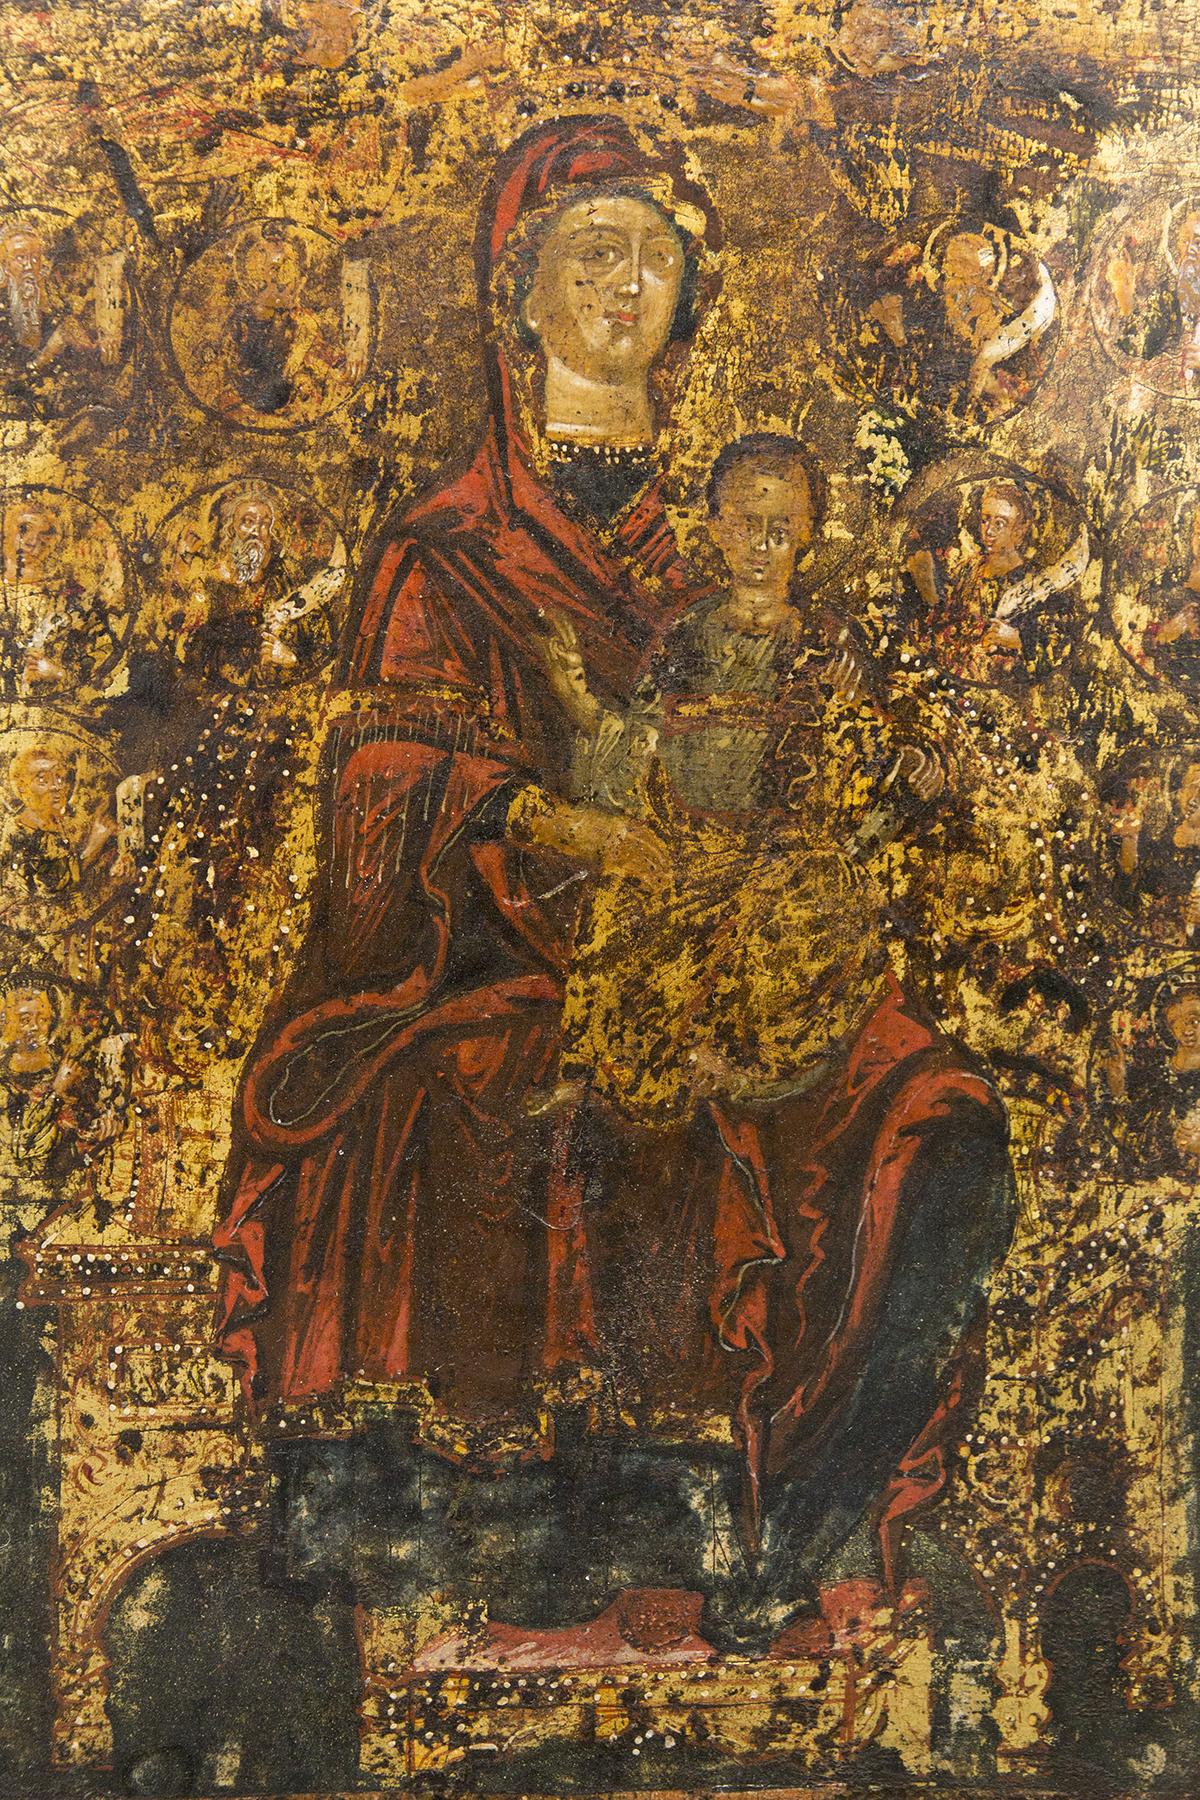 Splendid antique icon designed 1300 and 1400, Italian manufacture.
The painting is on a rectangular wooden panel. The painting depicts the Virgin Mary seated on a throne with Jesus Christ in her arms.
The 12 apostles are depicted on the side